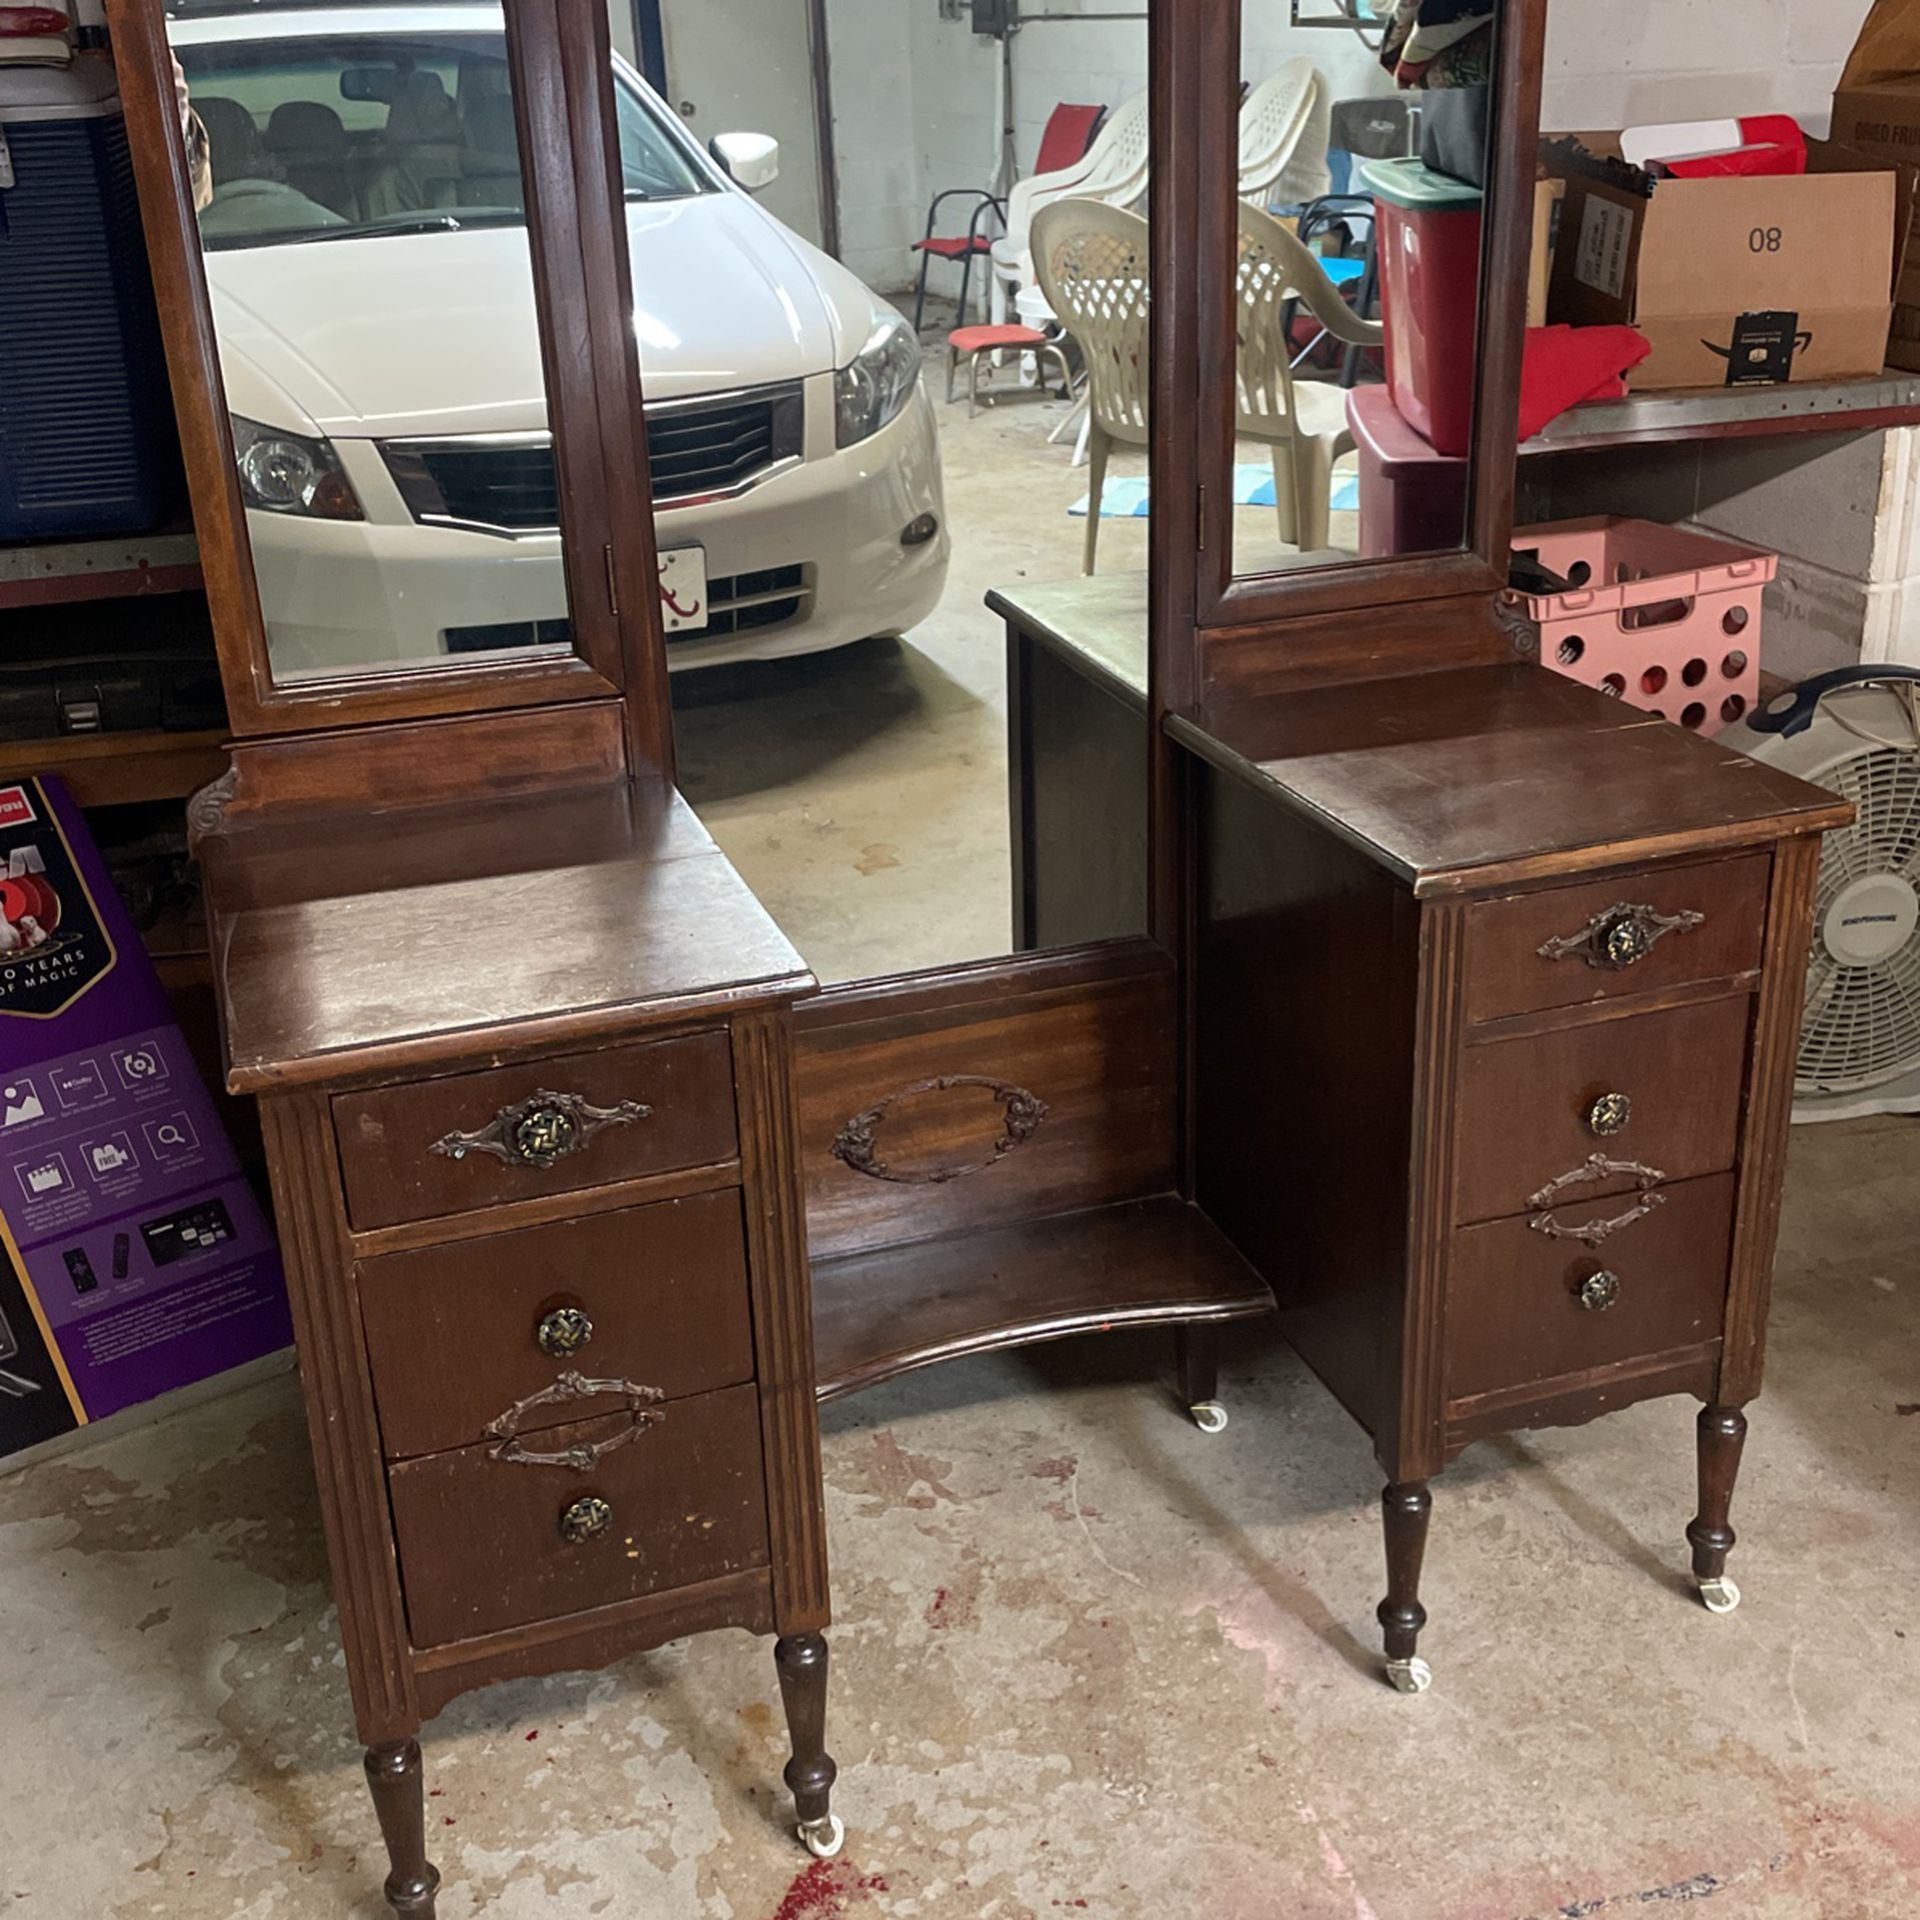 Antique Vanity With New Mirrors , Discount For Pick Up, Make An Offer